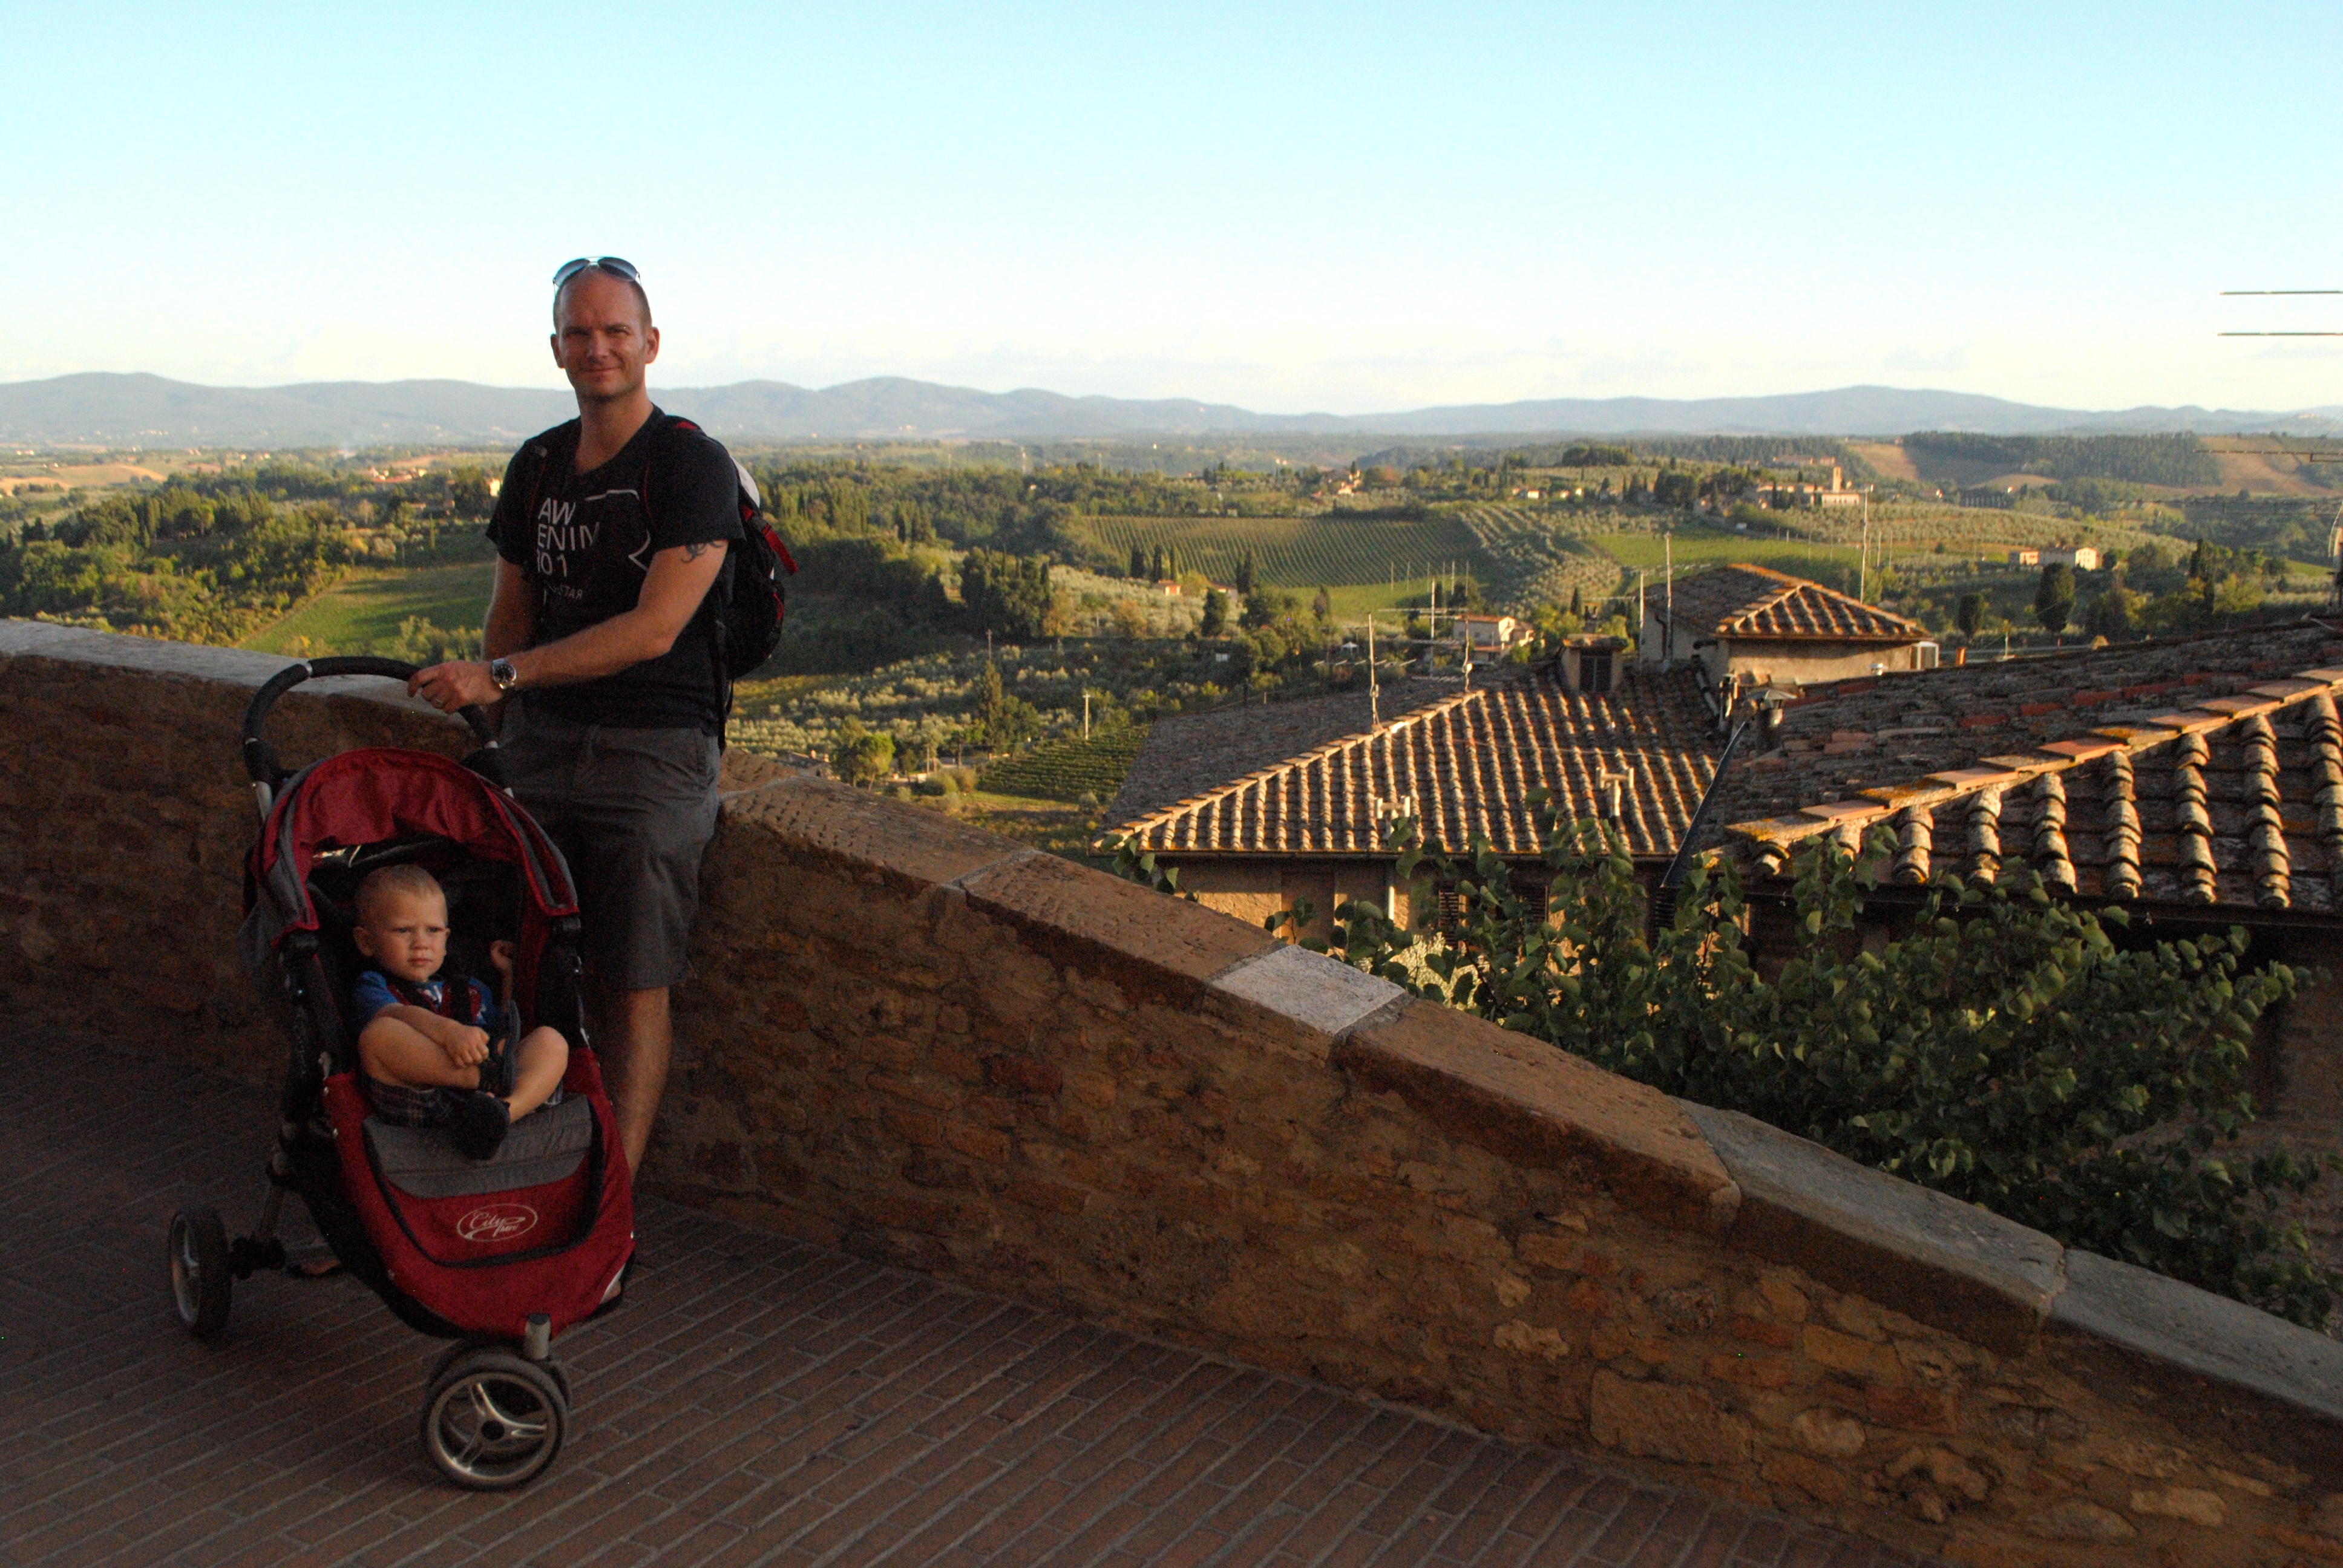 Shoulder Season - Mr Wanderlust and Thing 1 as a toddler in the Tuscan autumnal sun